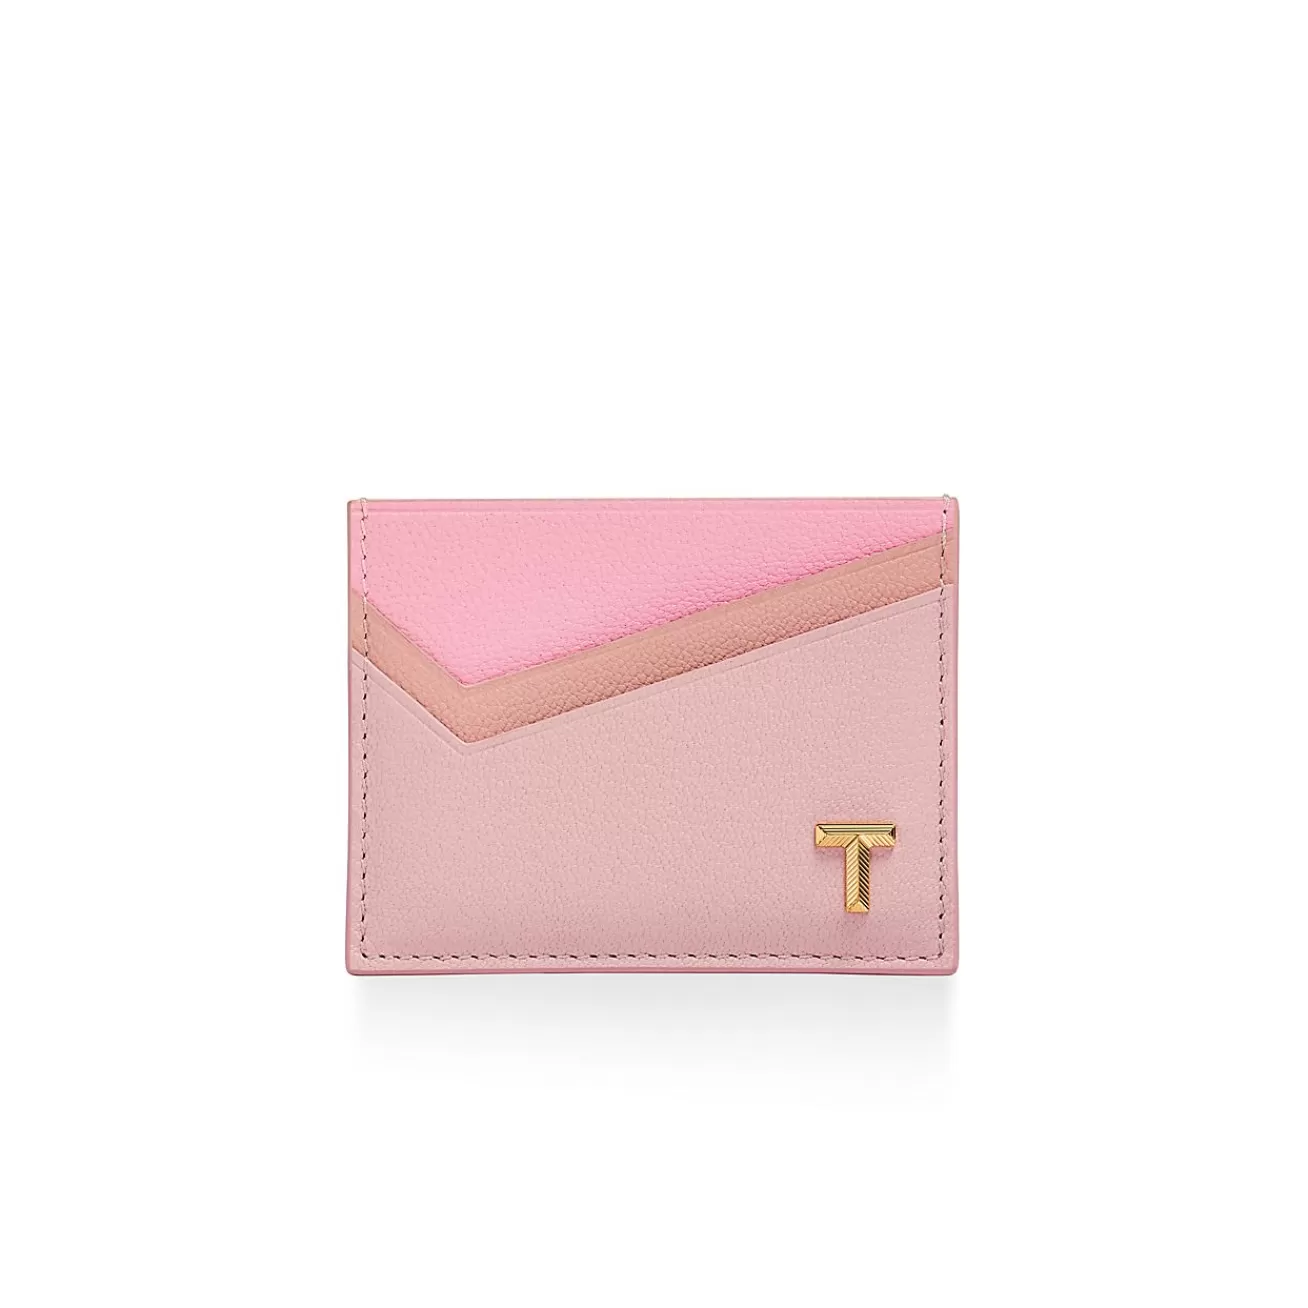 Tiffany & Co. Tiffany T Card Case in Pink Colorblock Leather | ^ Business Gifts | Small Leather Goods